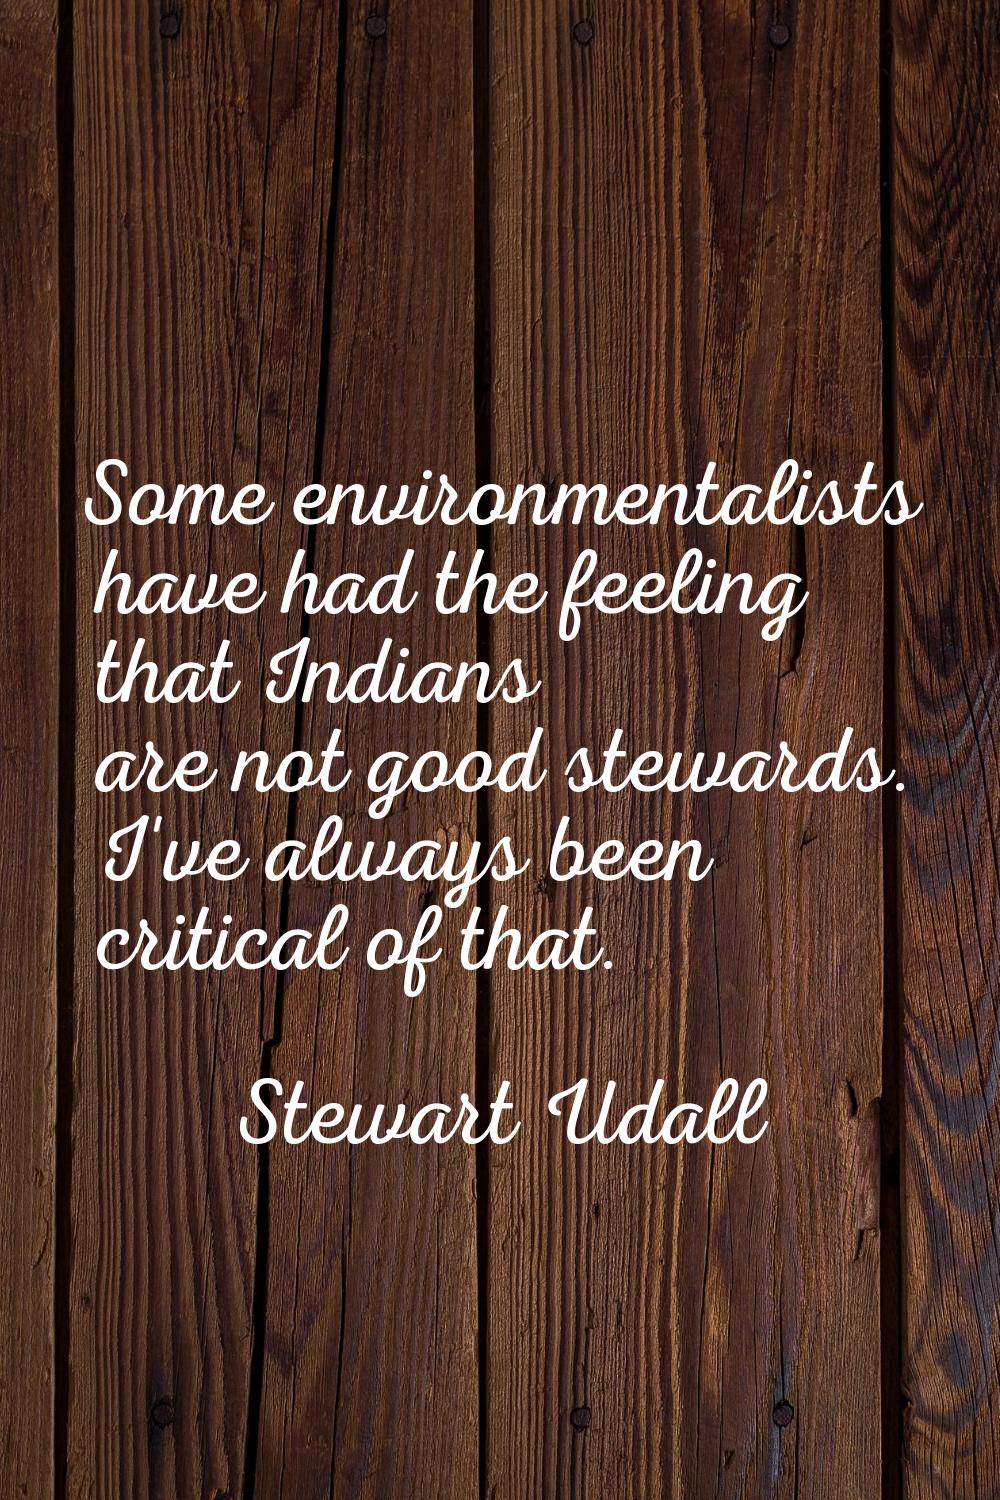 Some environmentalists have had the feeling that Indians are not good stewards. I've always been cr